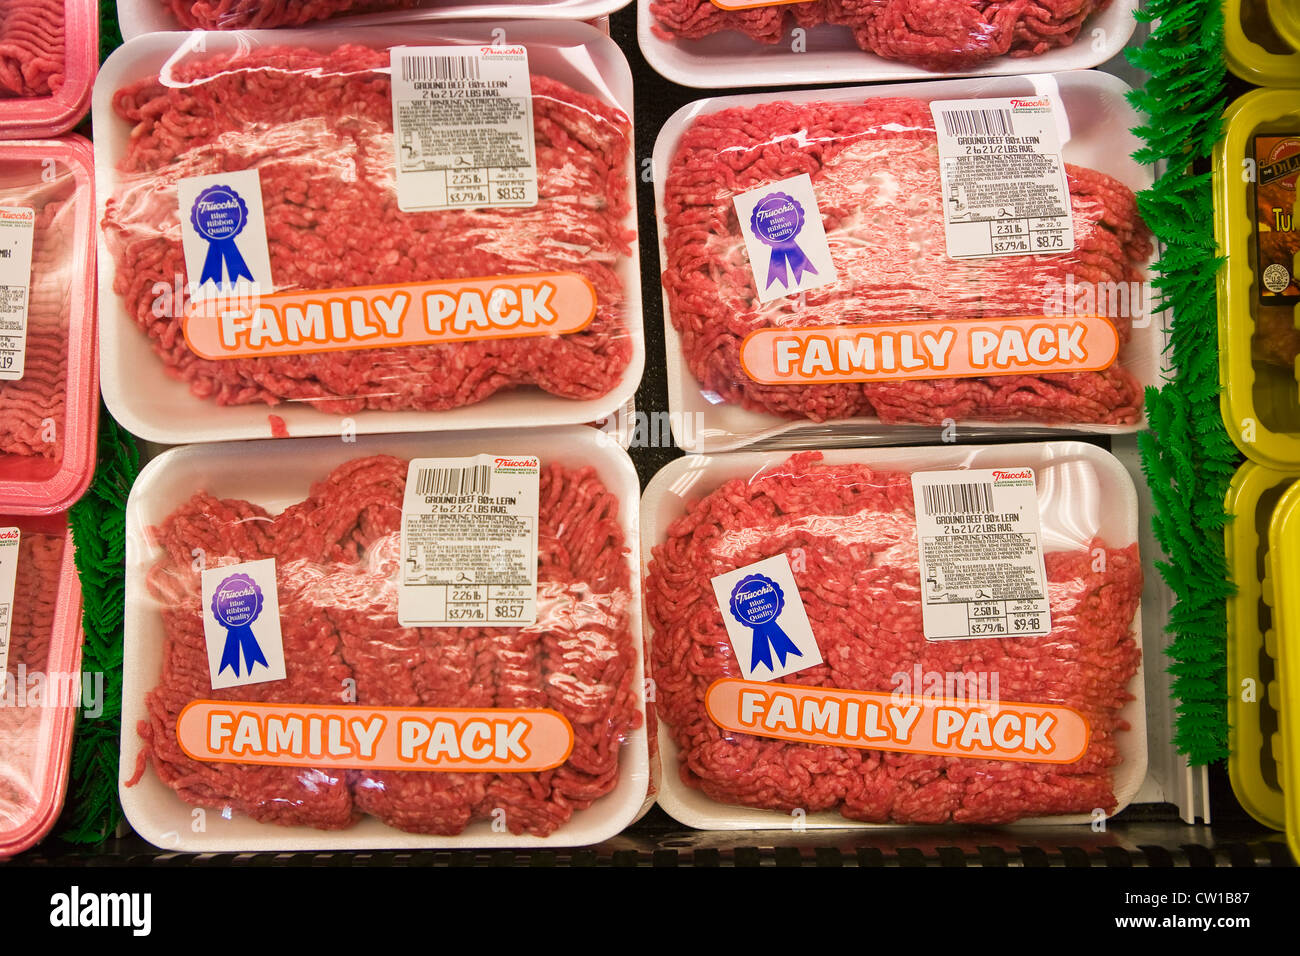 Meat Section of Grocery Store Boston, Massachusetts USA Stock Photo